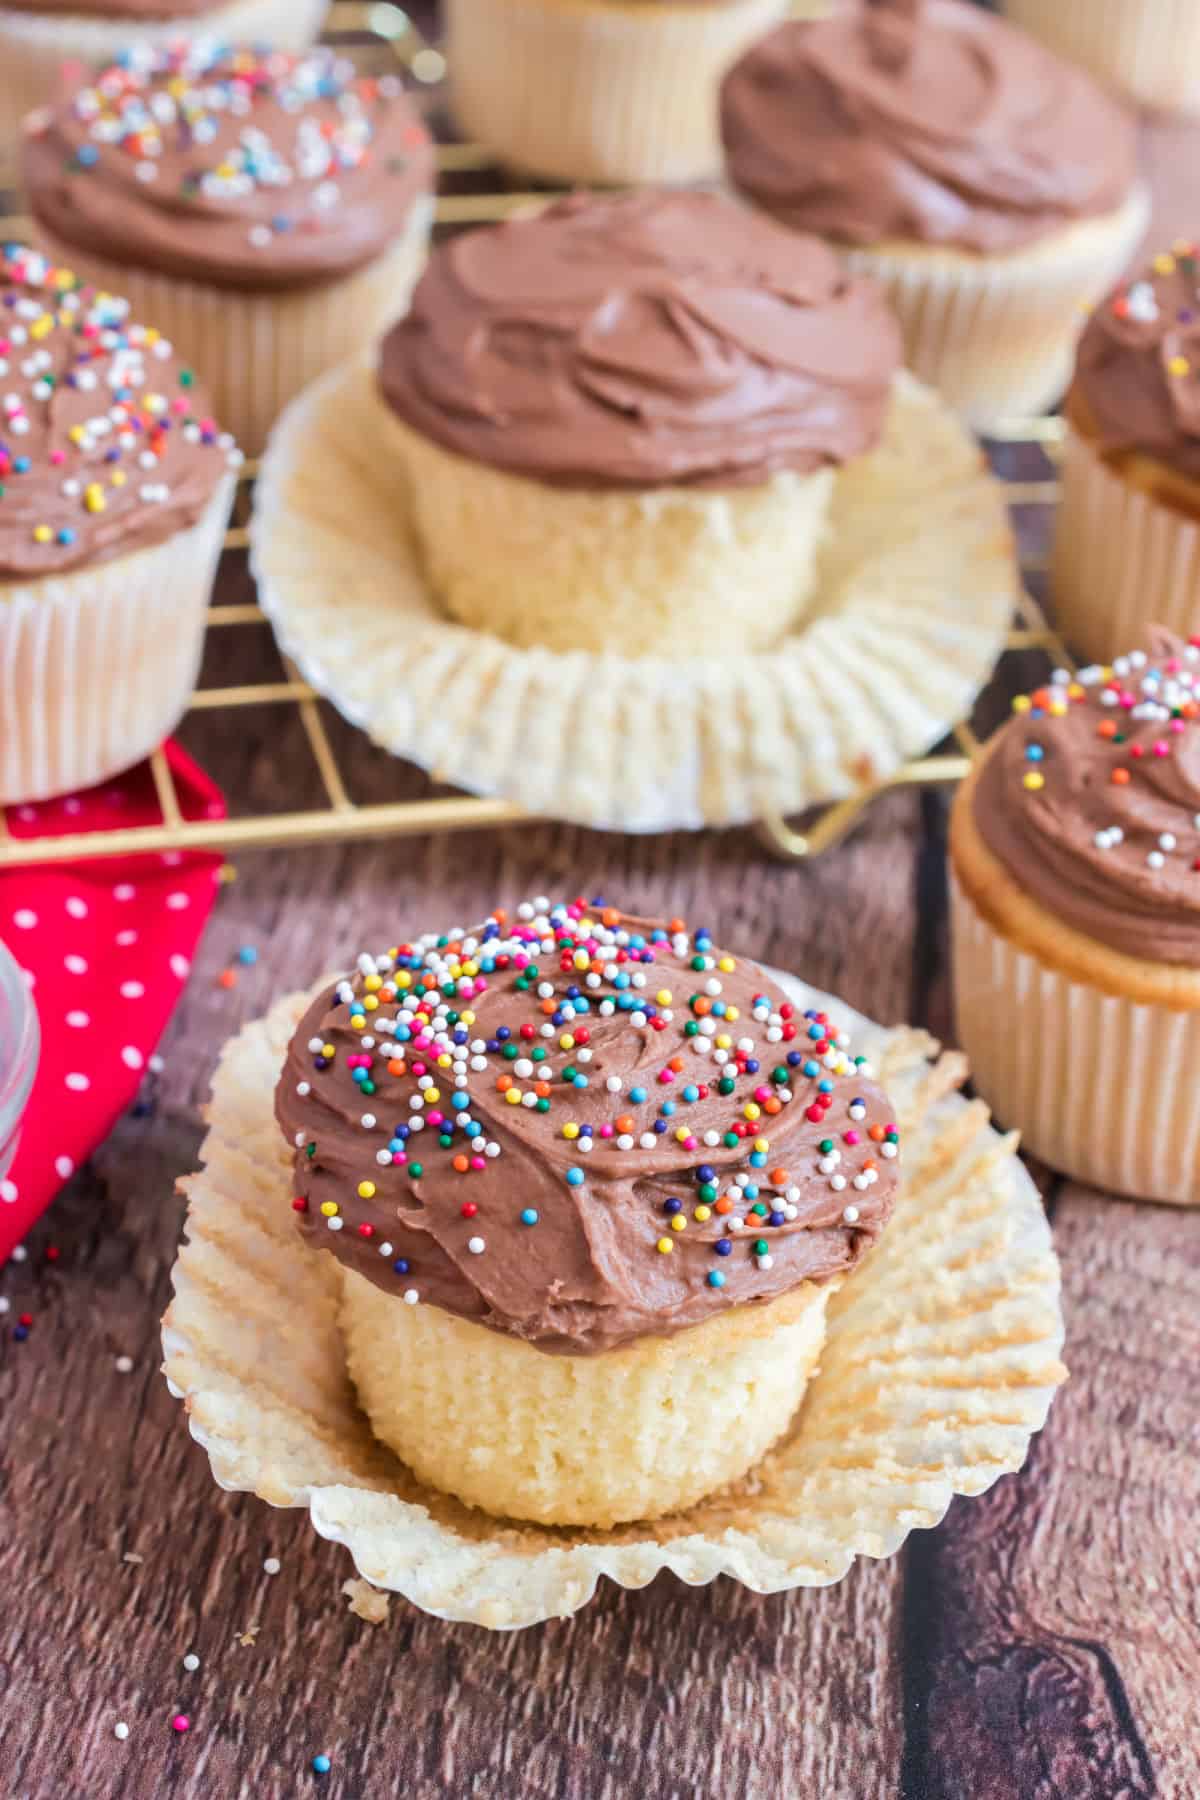 Yellow cupcake unwrapped from liner and topped with chocolate sour cream frosting.